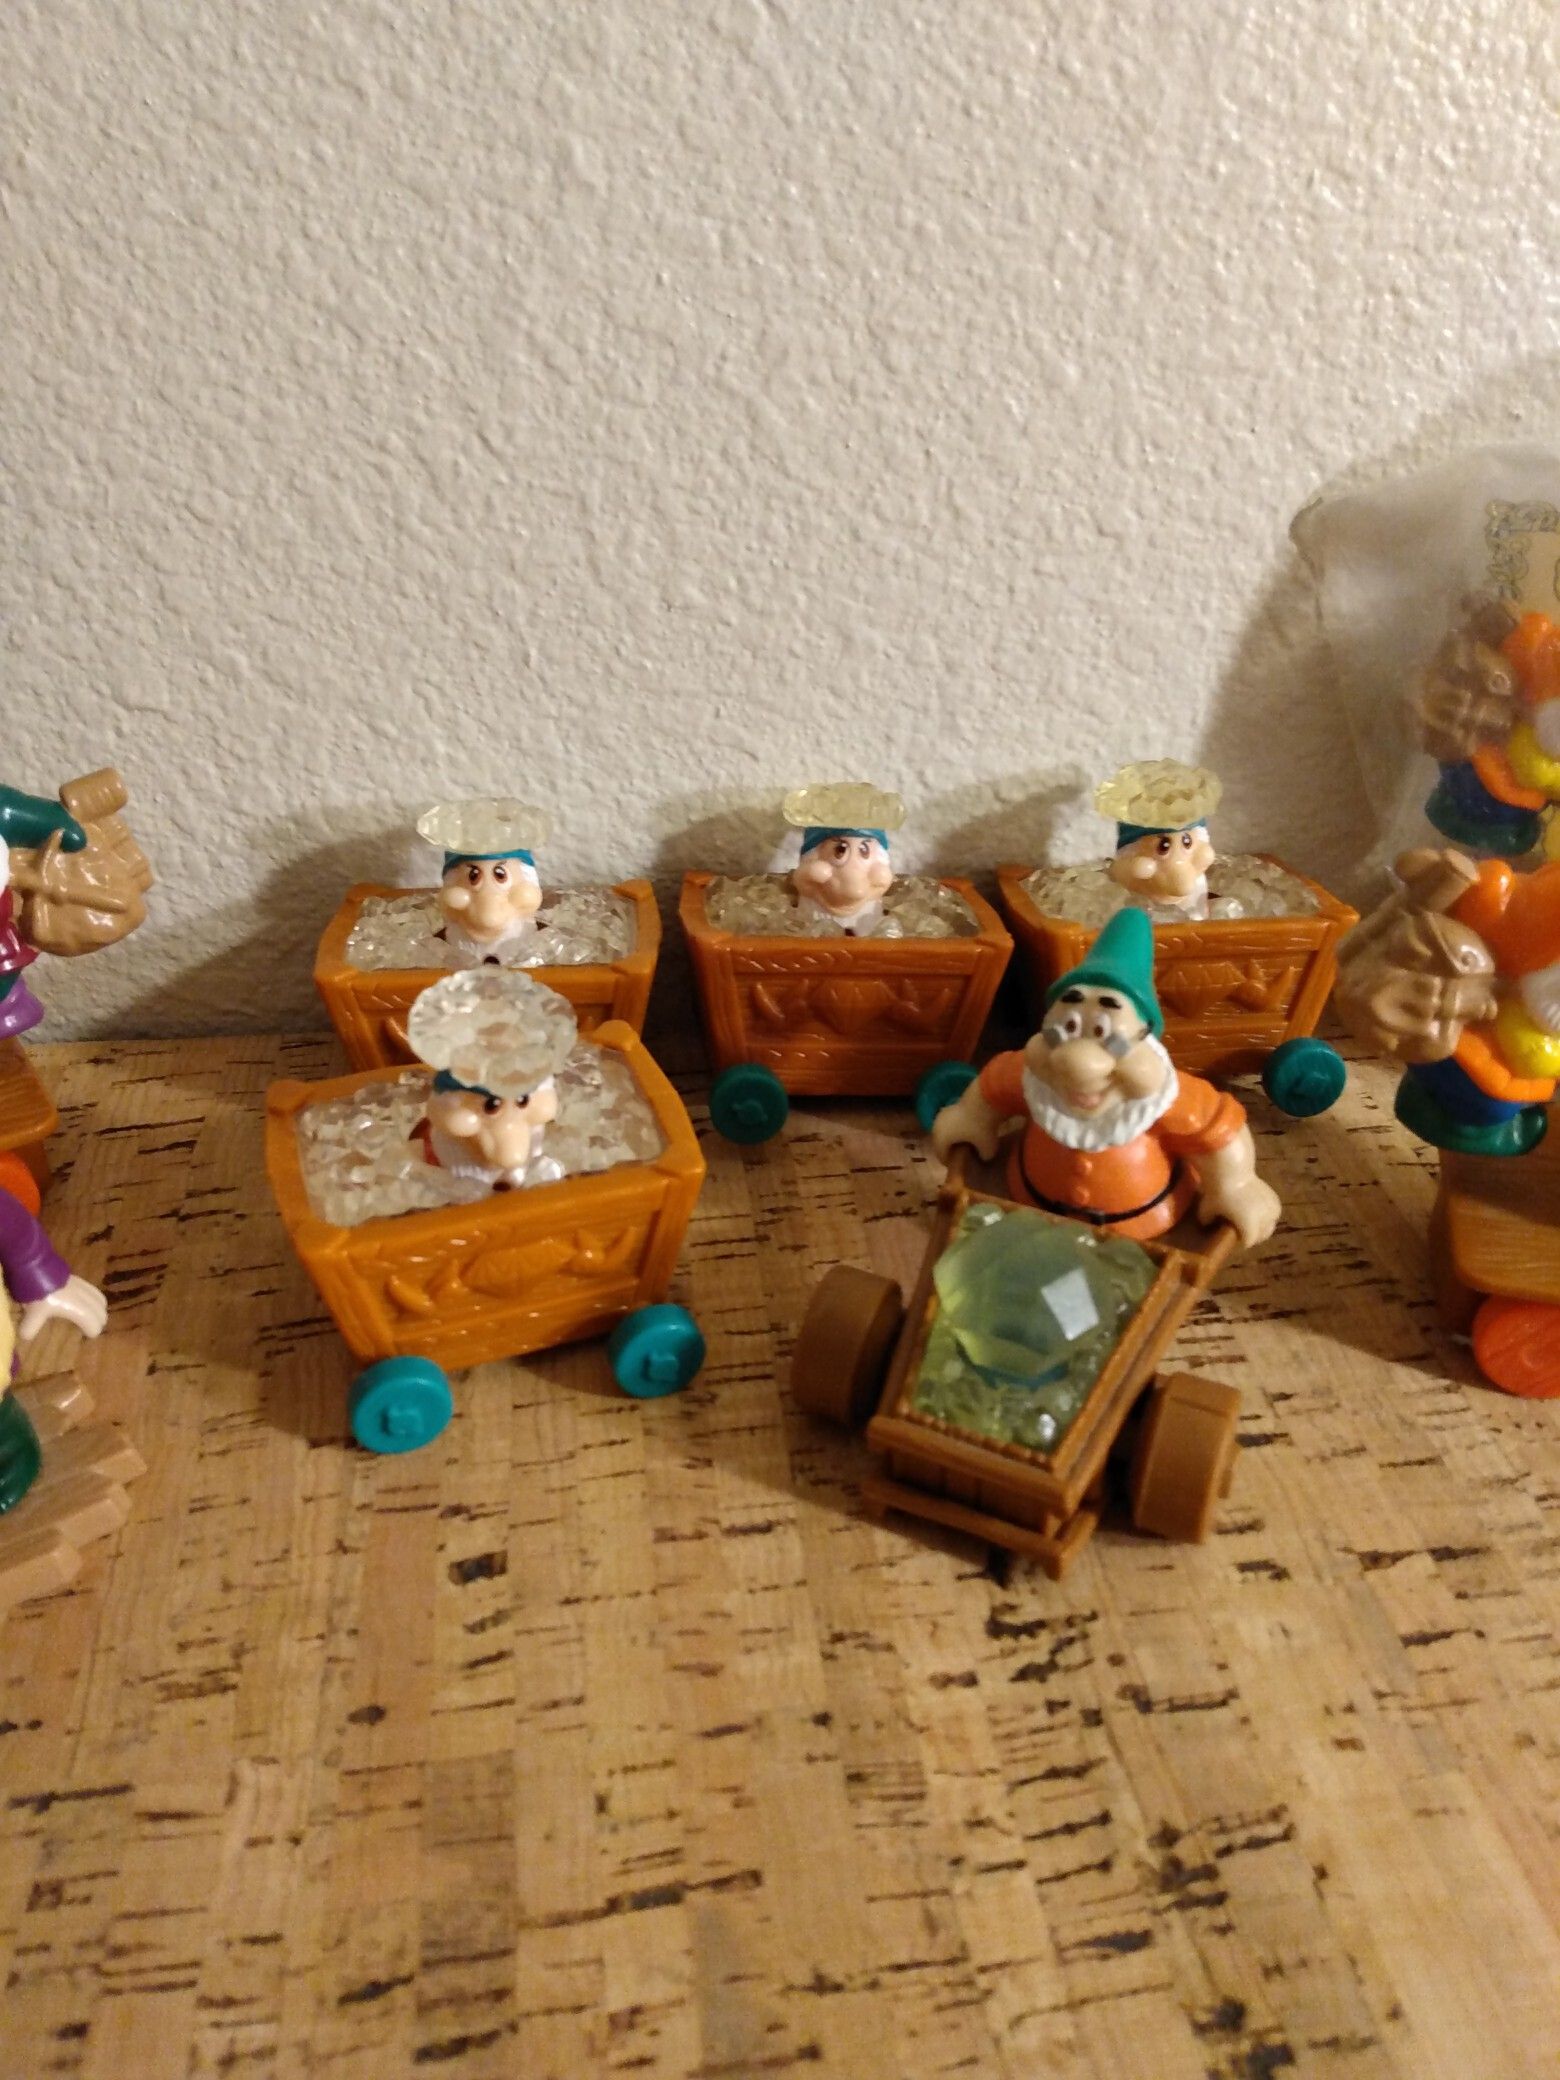 Snow white and the Seven Dwarfs VTG Figurine toy s LOT